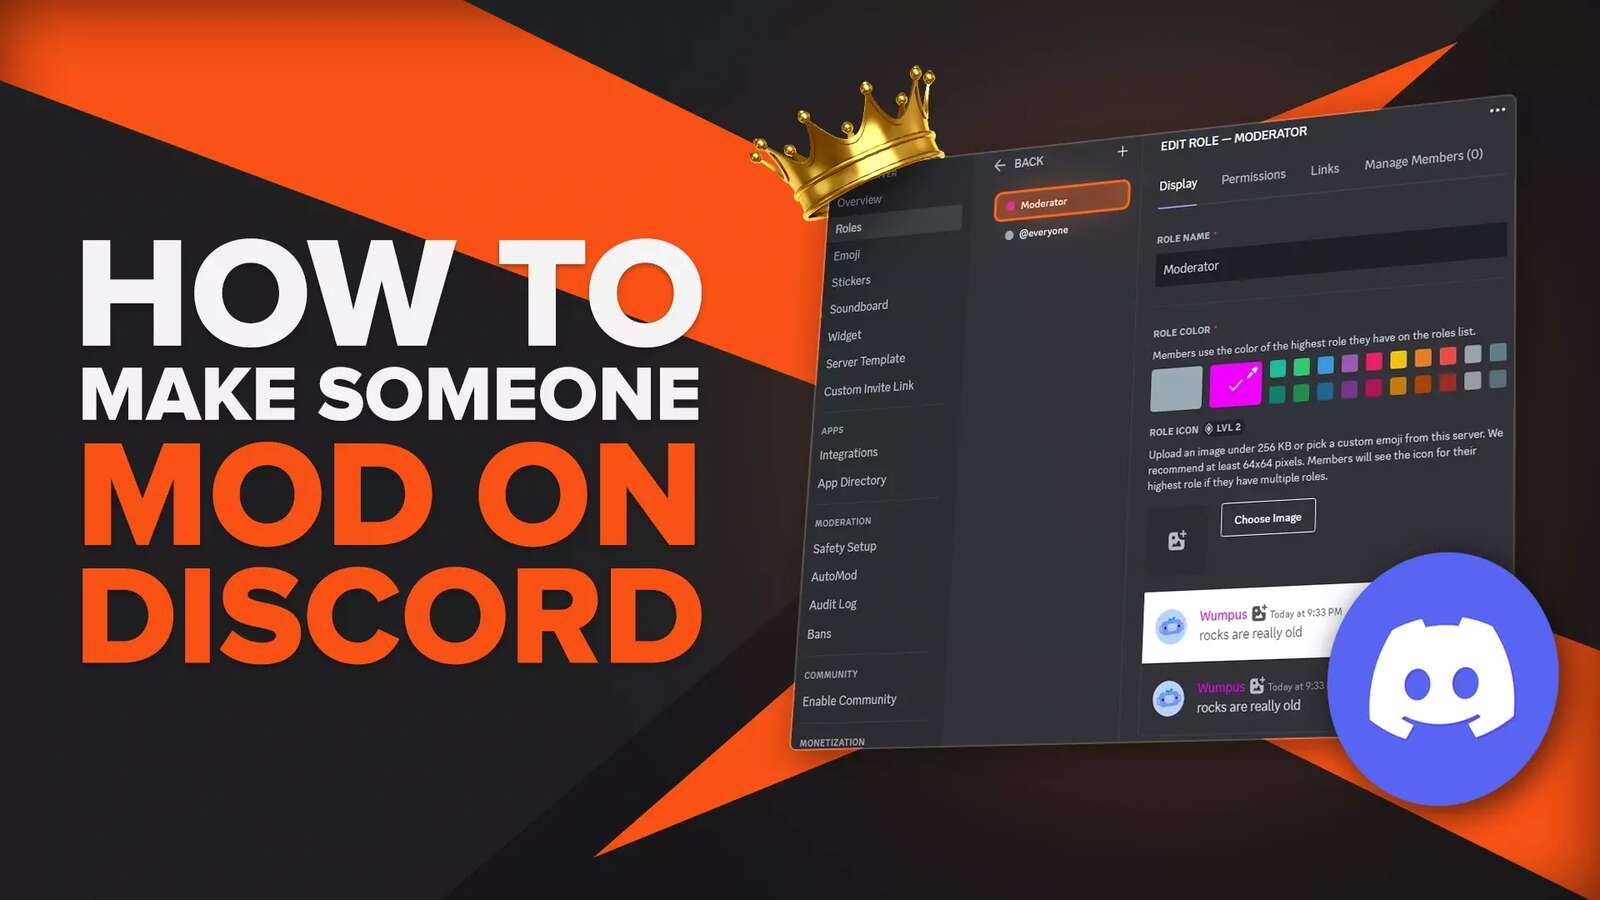 How To Make Someone A Moderator On Discord [Step-By-Step]